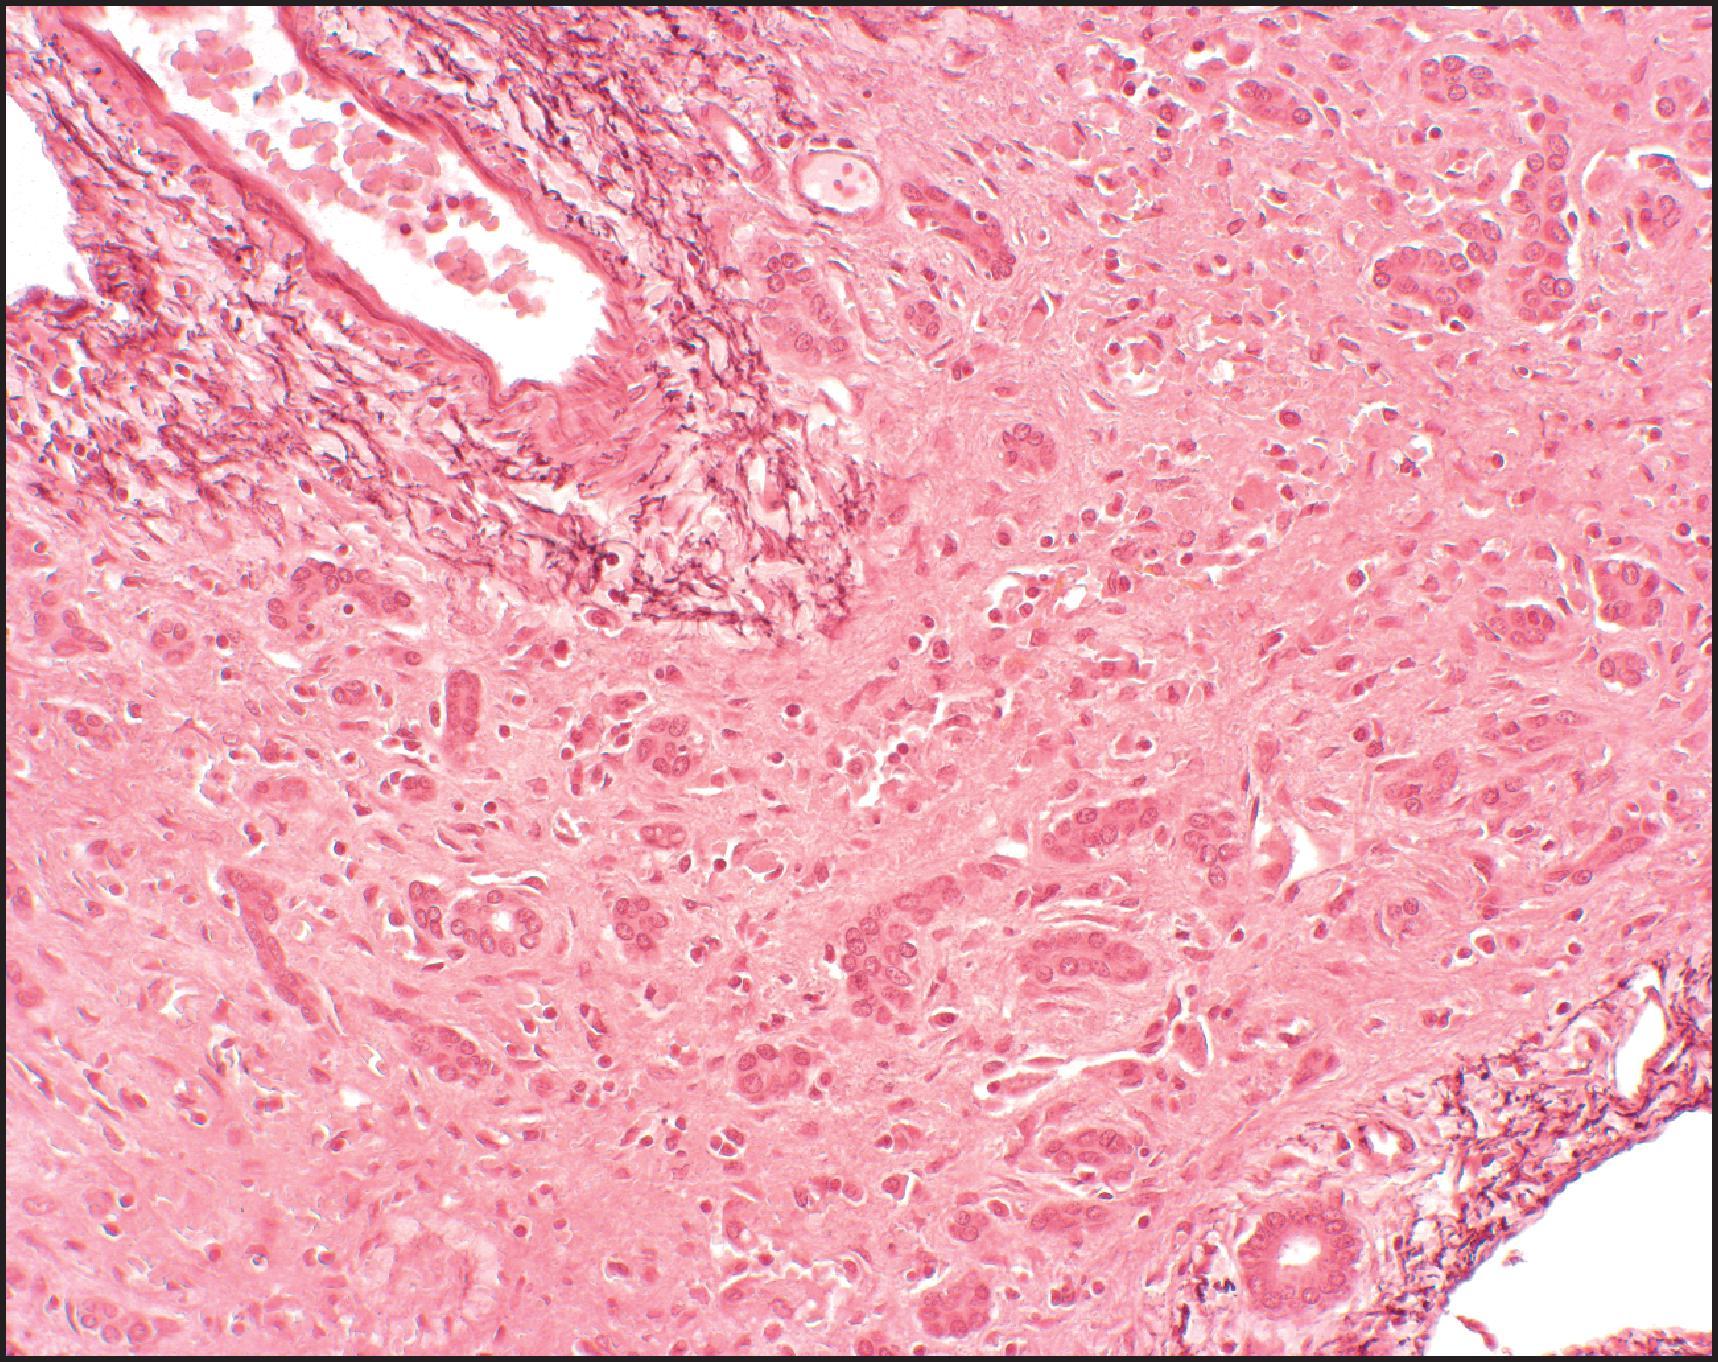 Figure 6.10, Acute hepatitis with bridging necrosis. Deeply stained elastic fibres are present in the portal tract. Adjacent areas of collapse have no elastic tissue. (Orcein stain.)